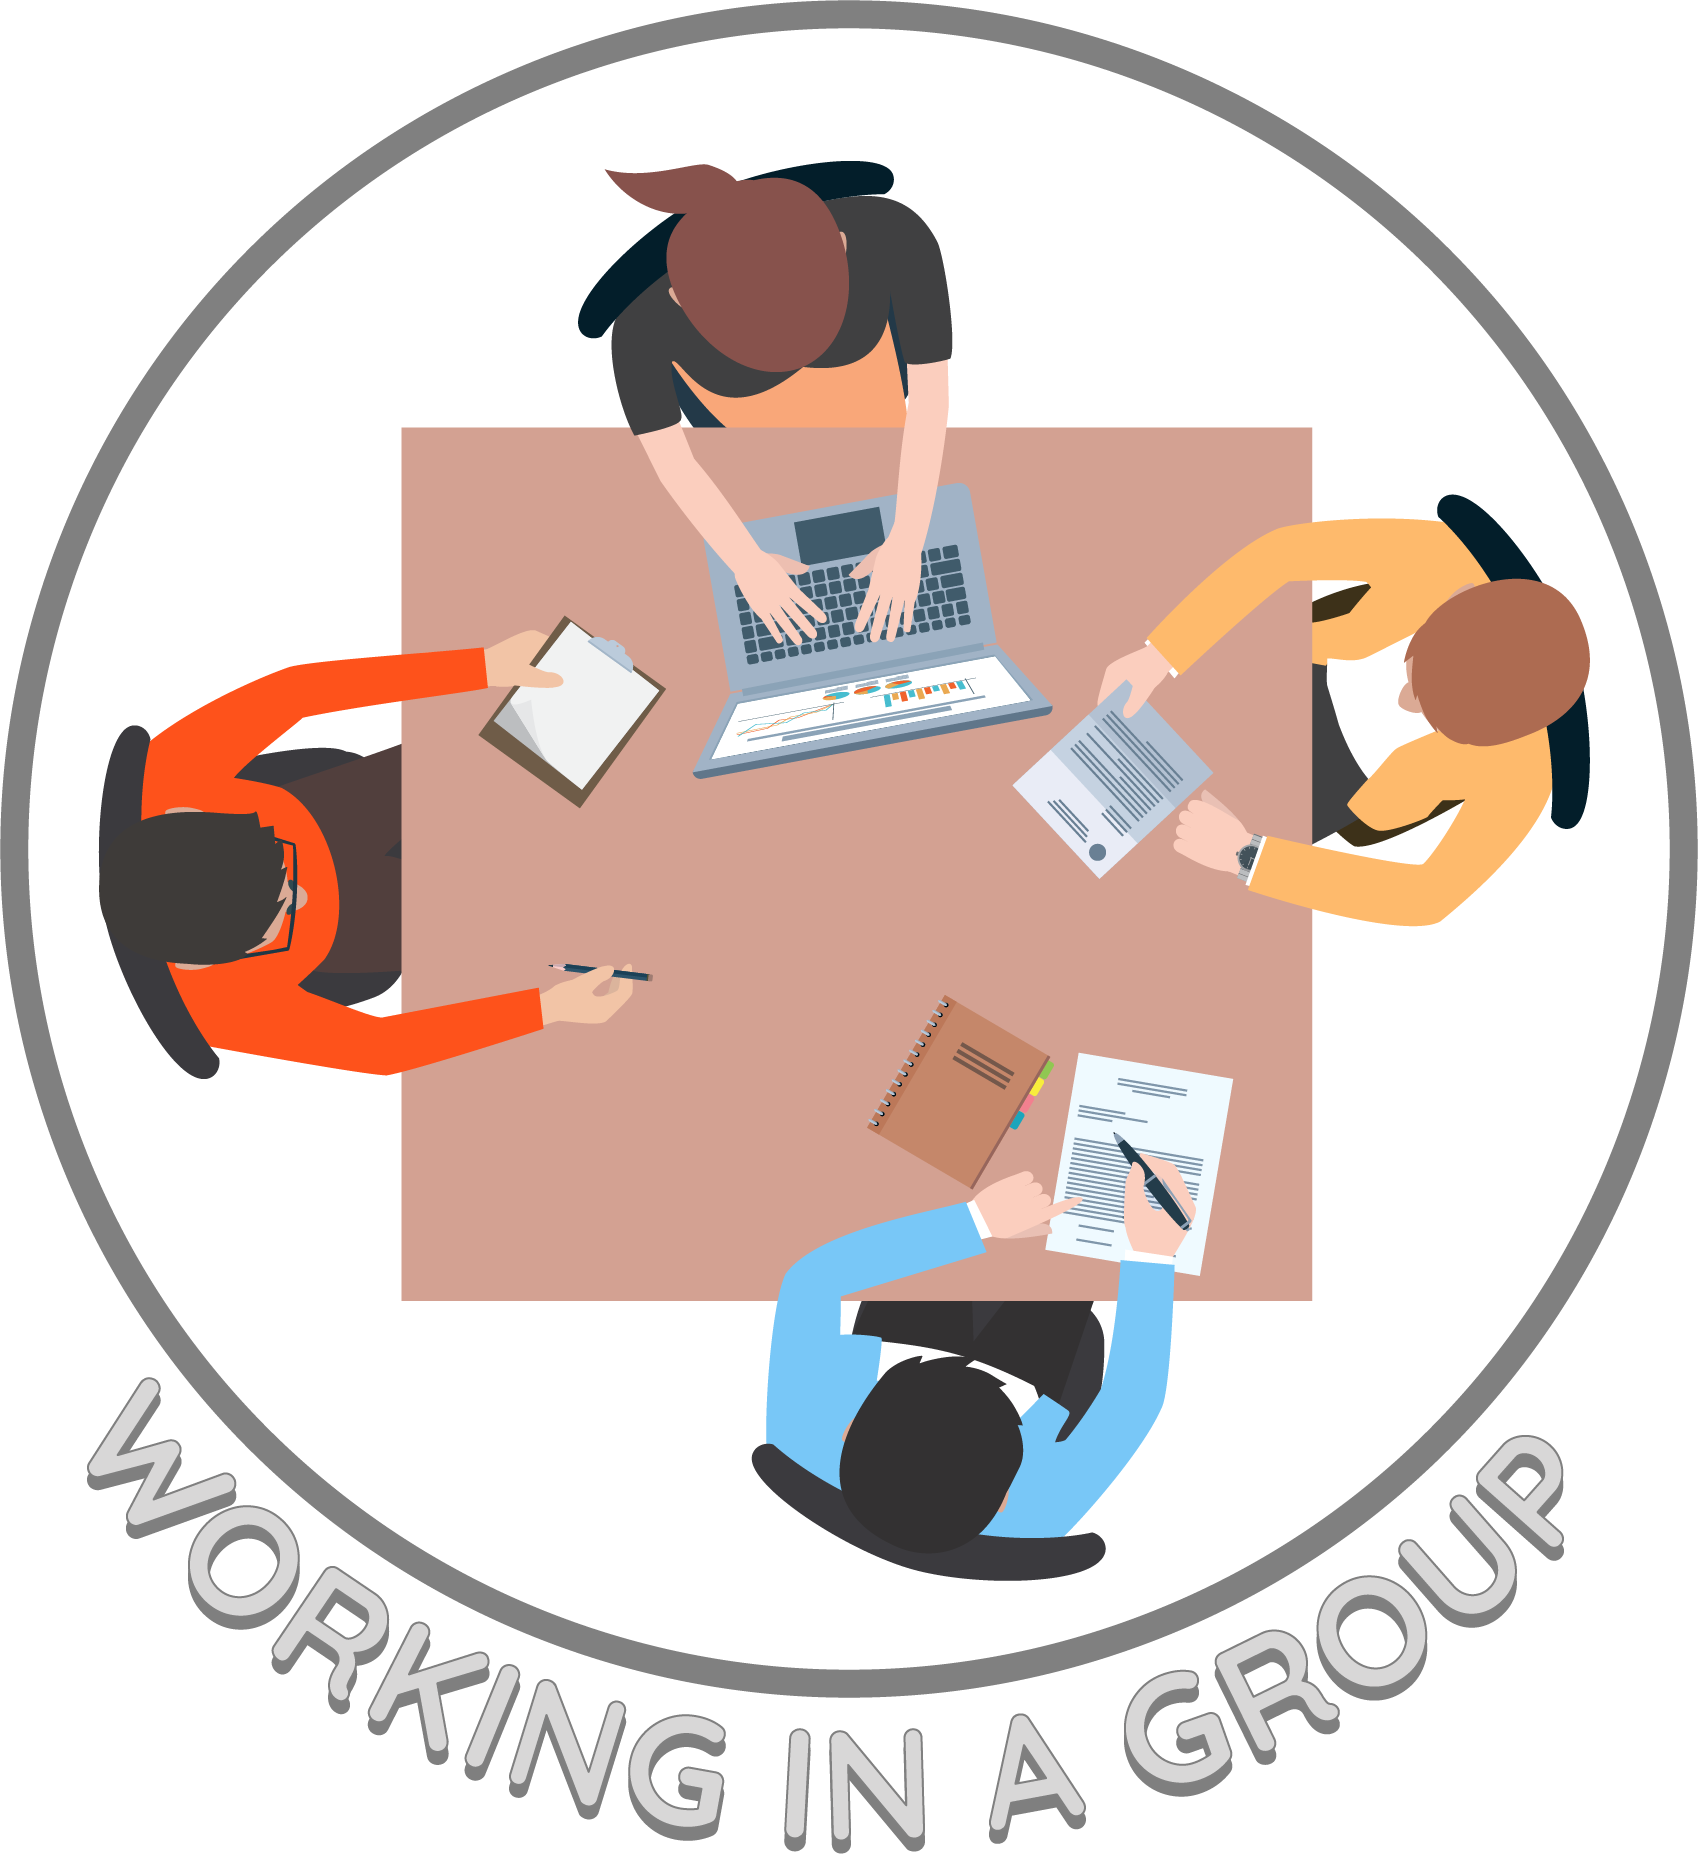 Why is Group Work Important for Students?